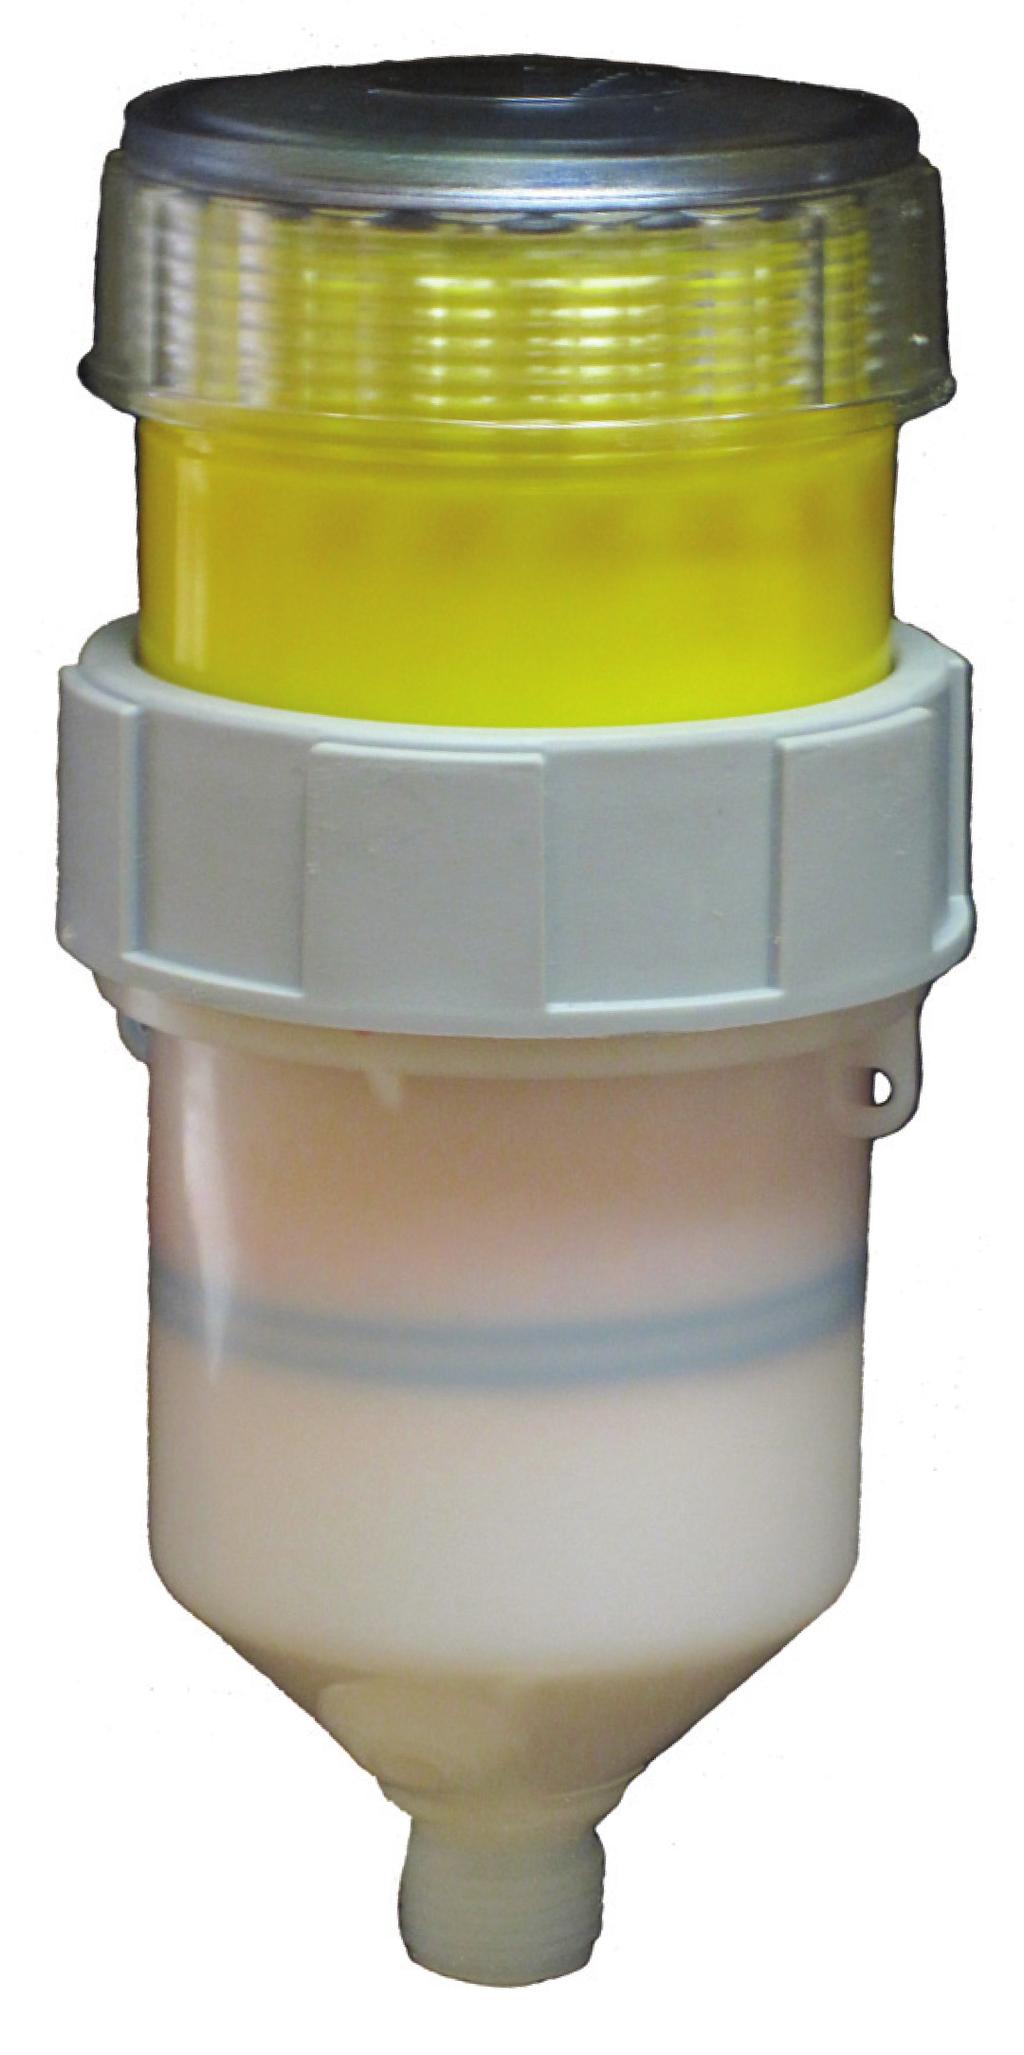 JACK LUBER Automatic Lubricator with Replaceable Cartridge The JACK LUBER is the most versatile product in the ATS product line.